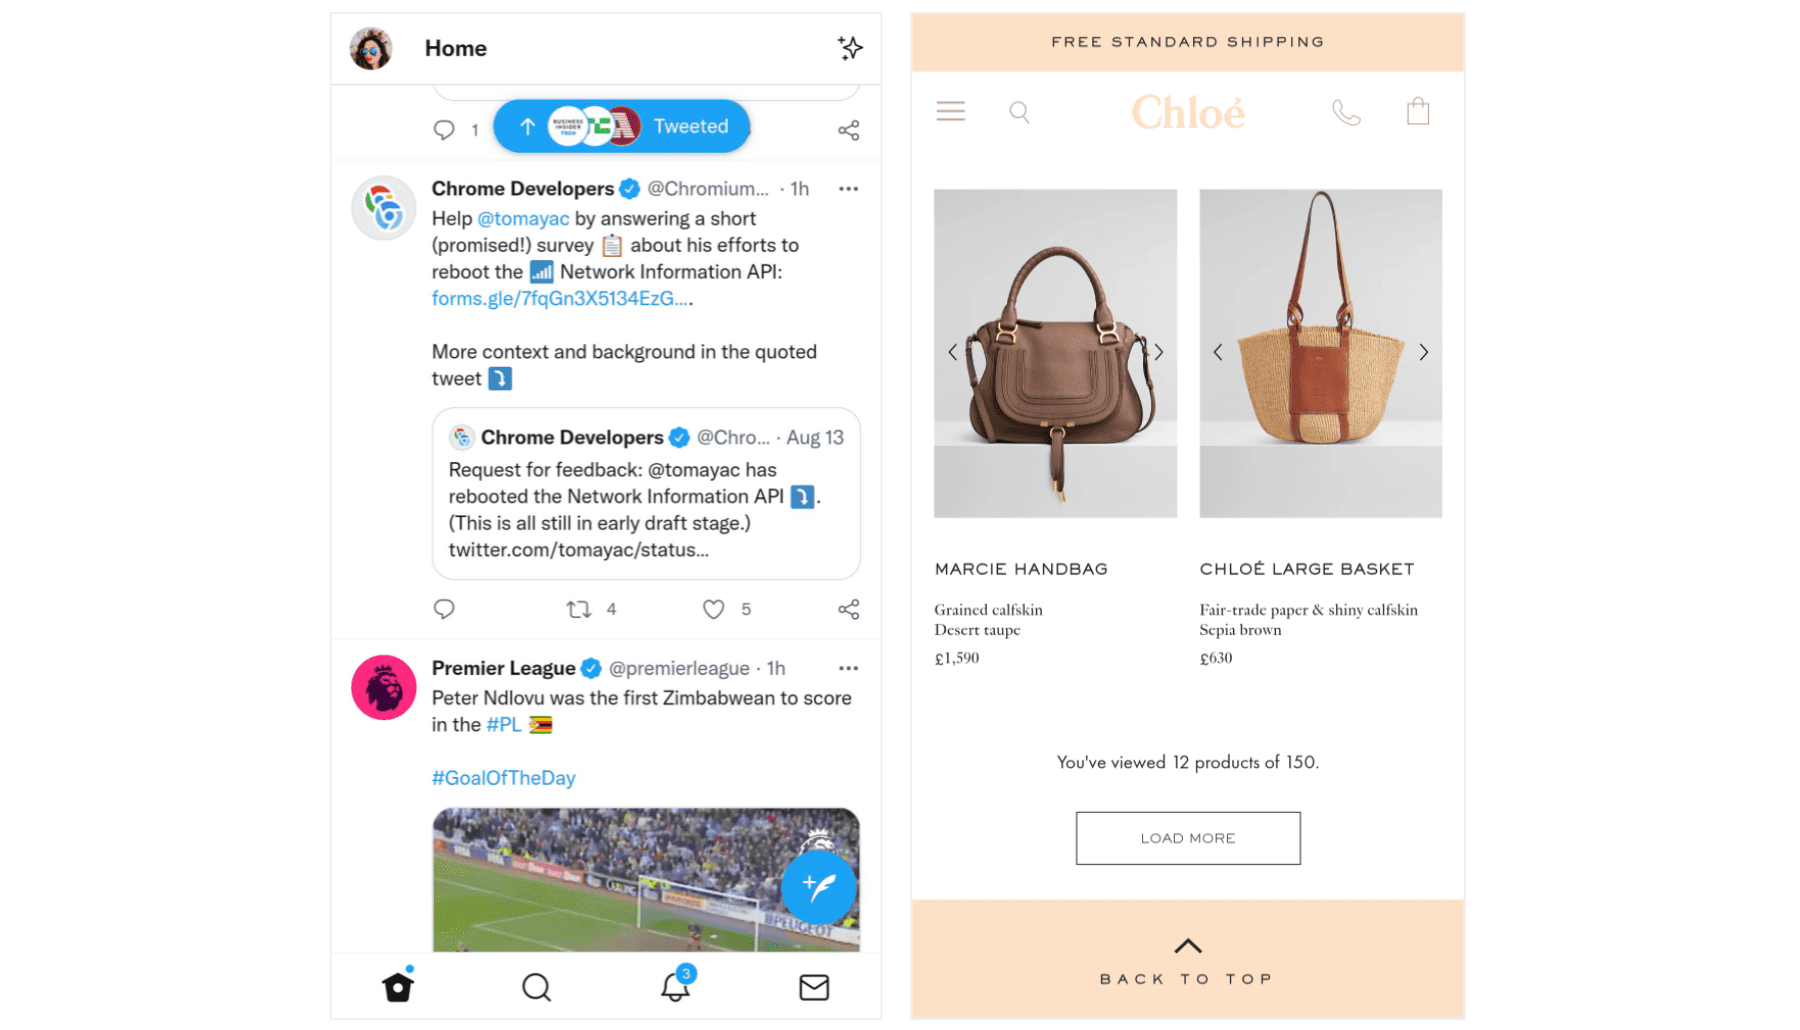 Examples of
    dynamic content loading without causing unexpected layout shifts from Twitter and the Chloé website